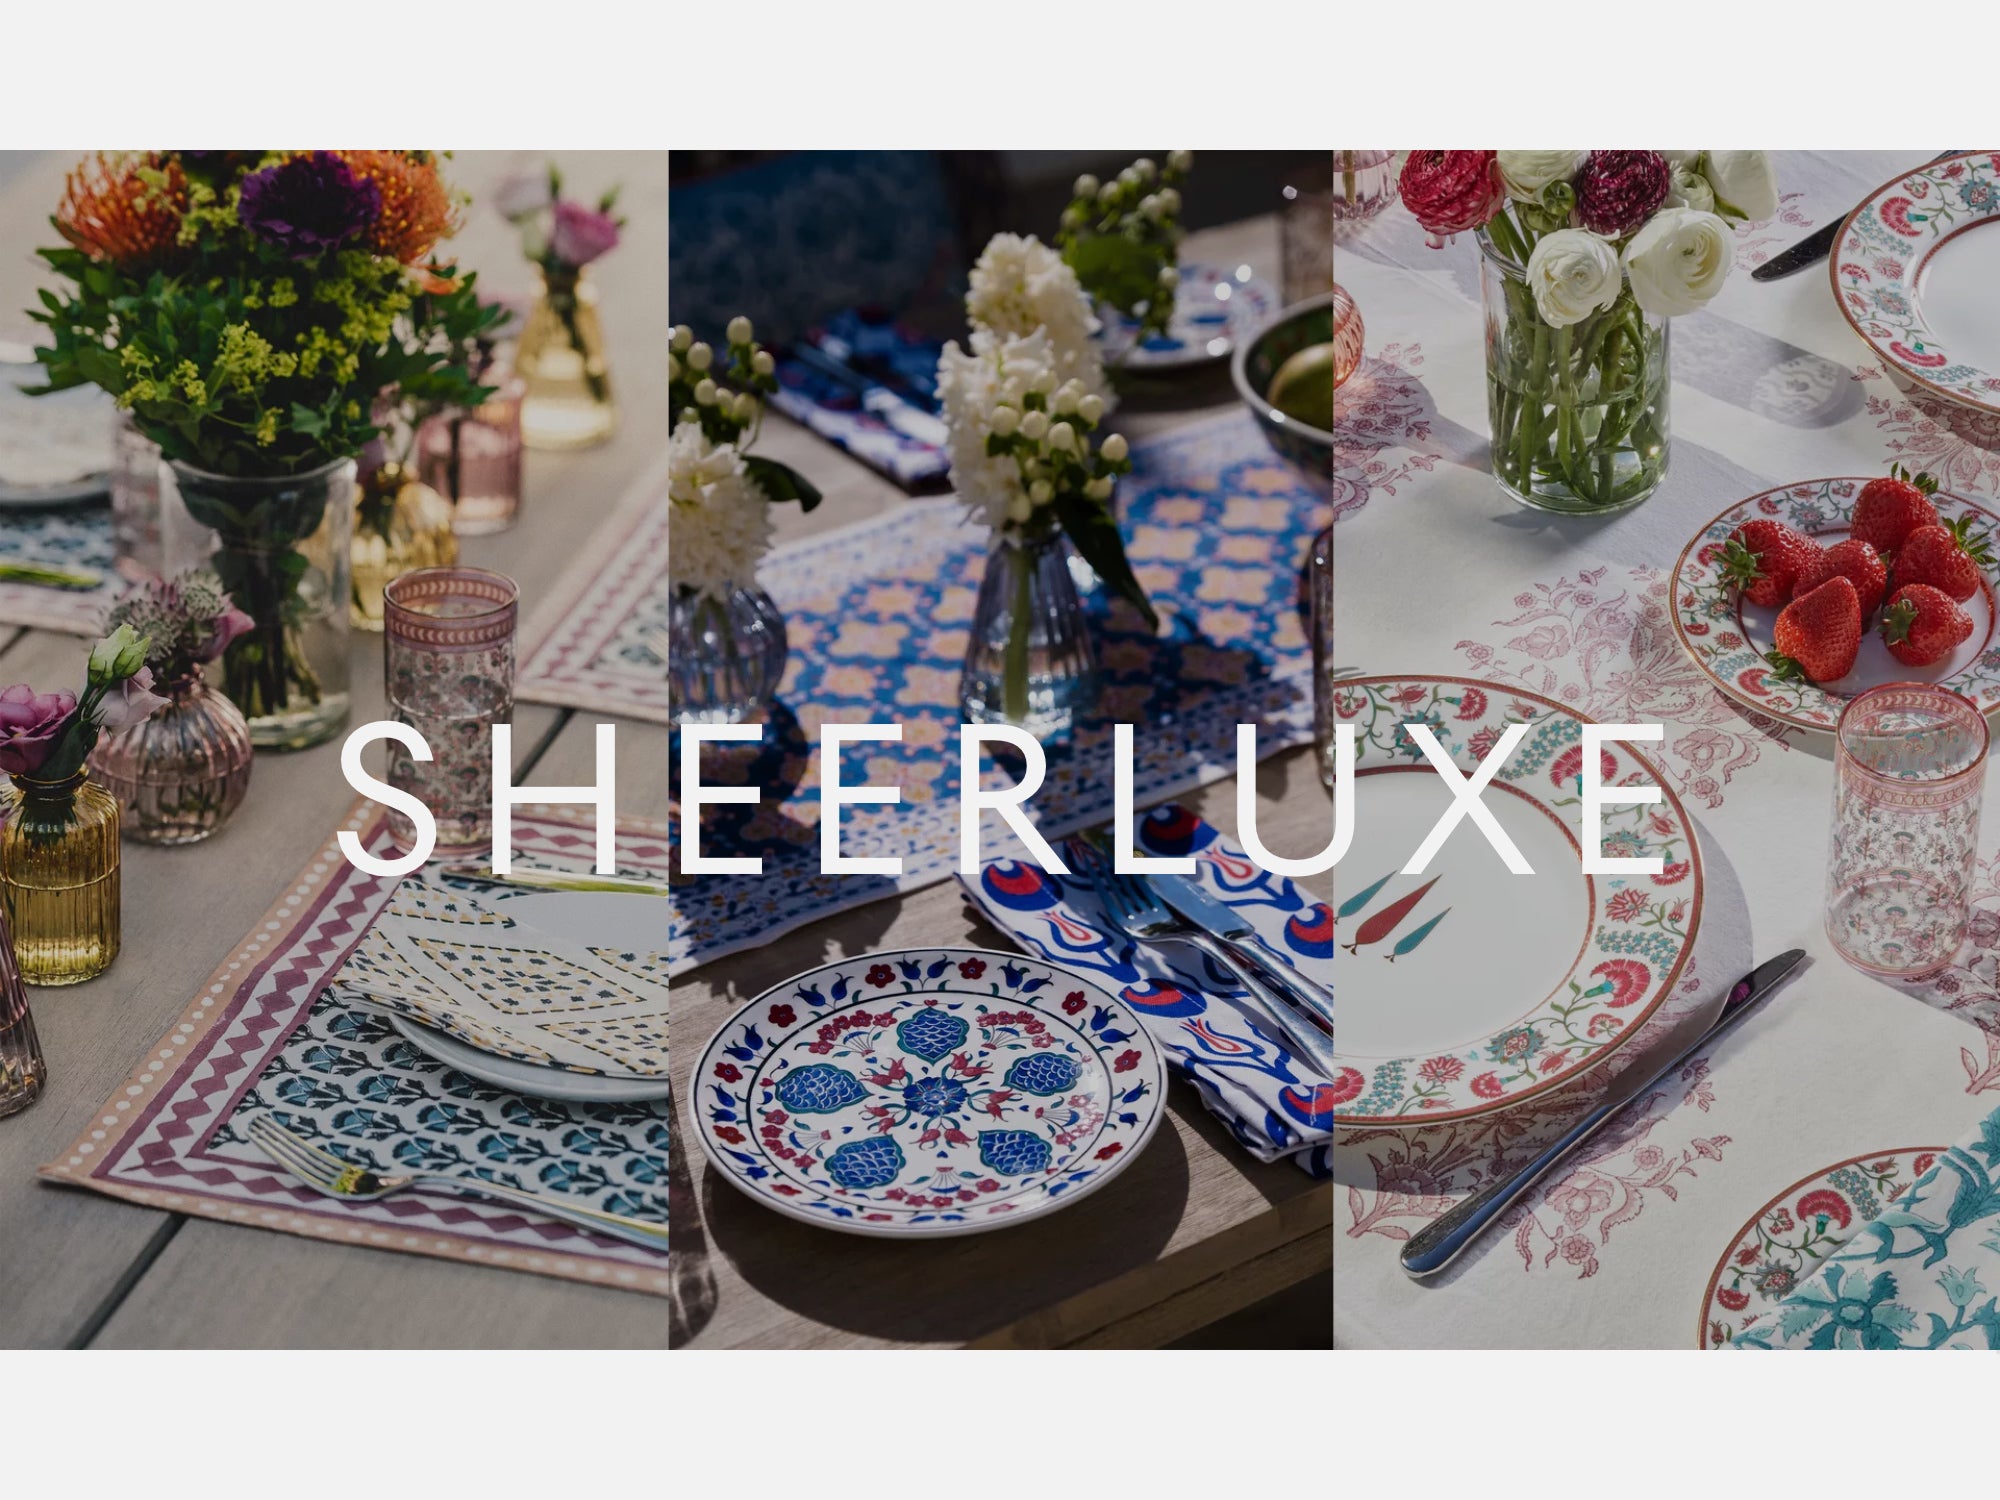 Sheerluxe: Small Interior Brands To Know About